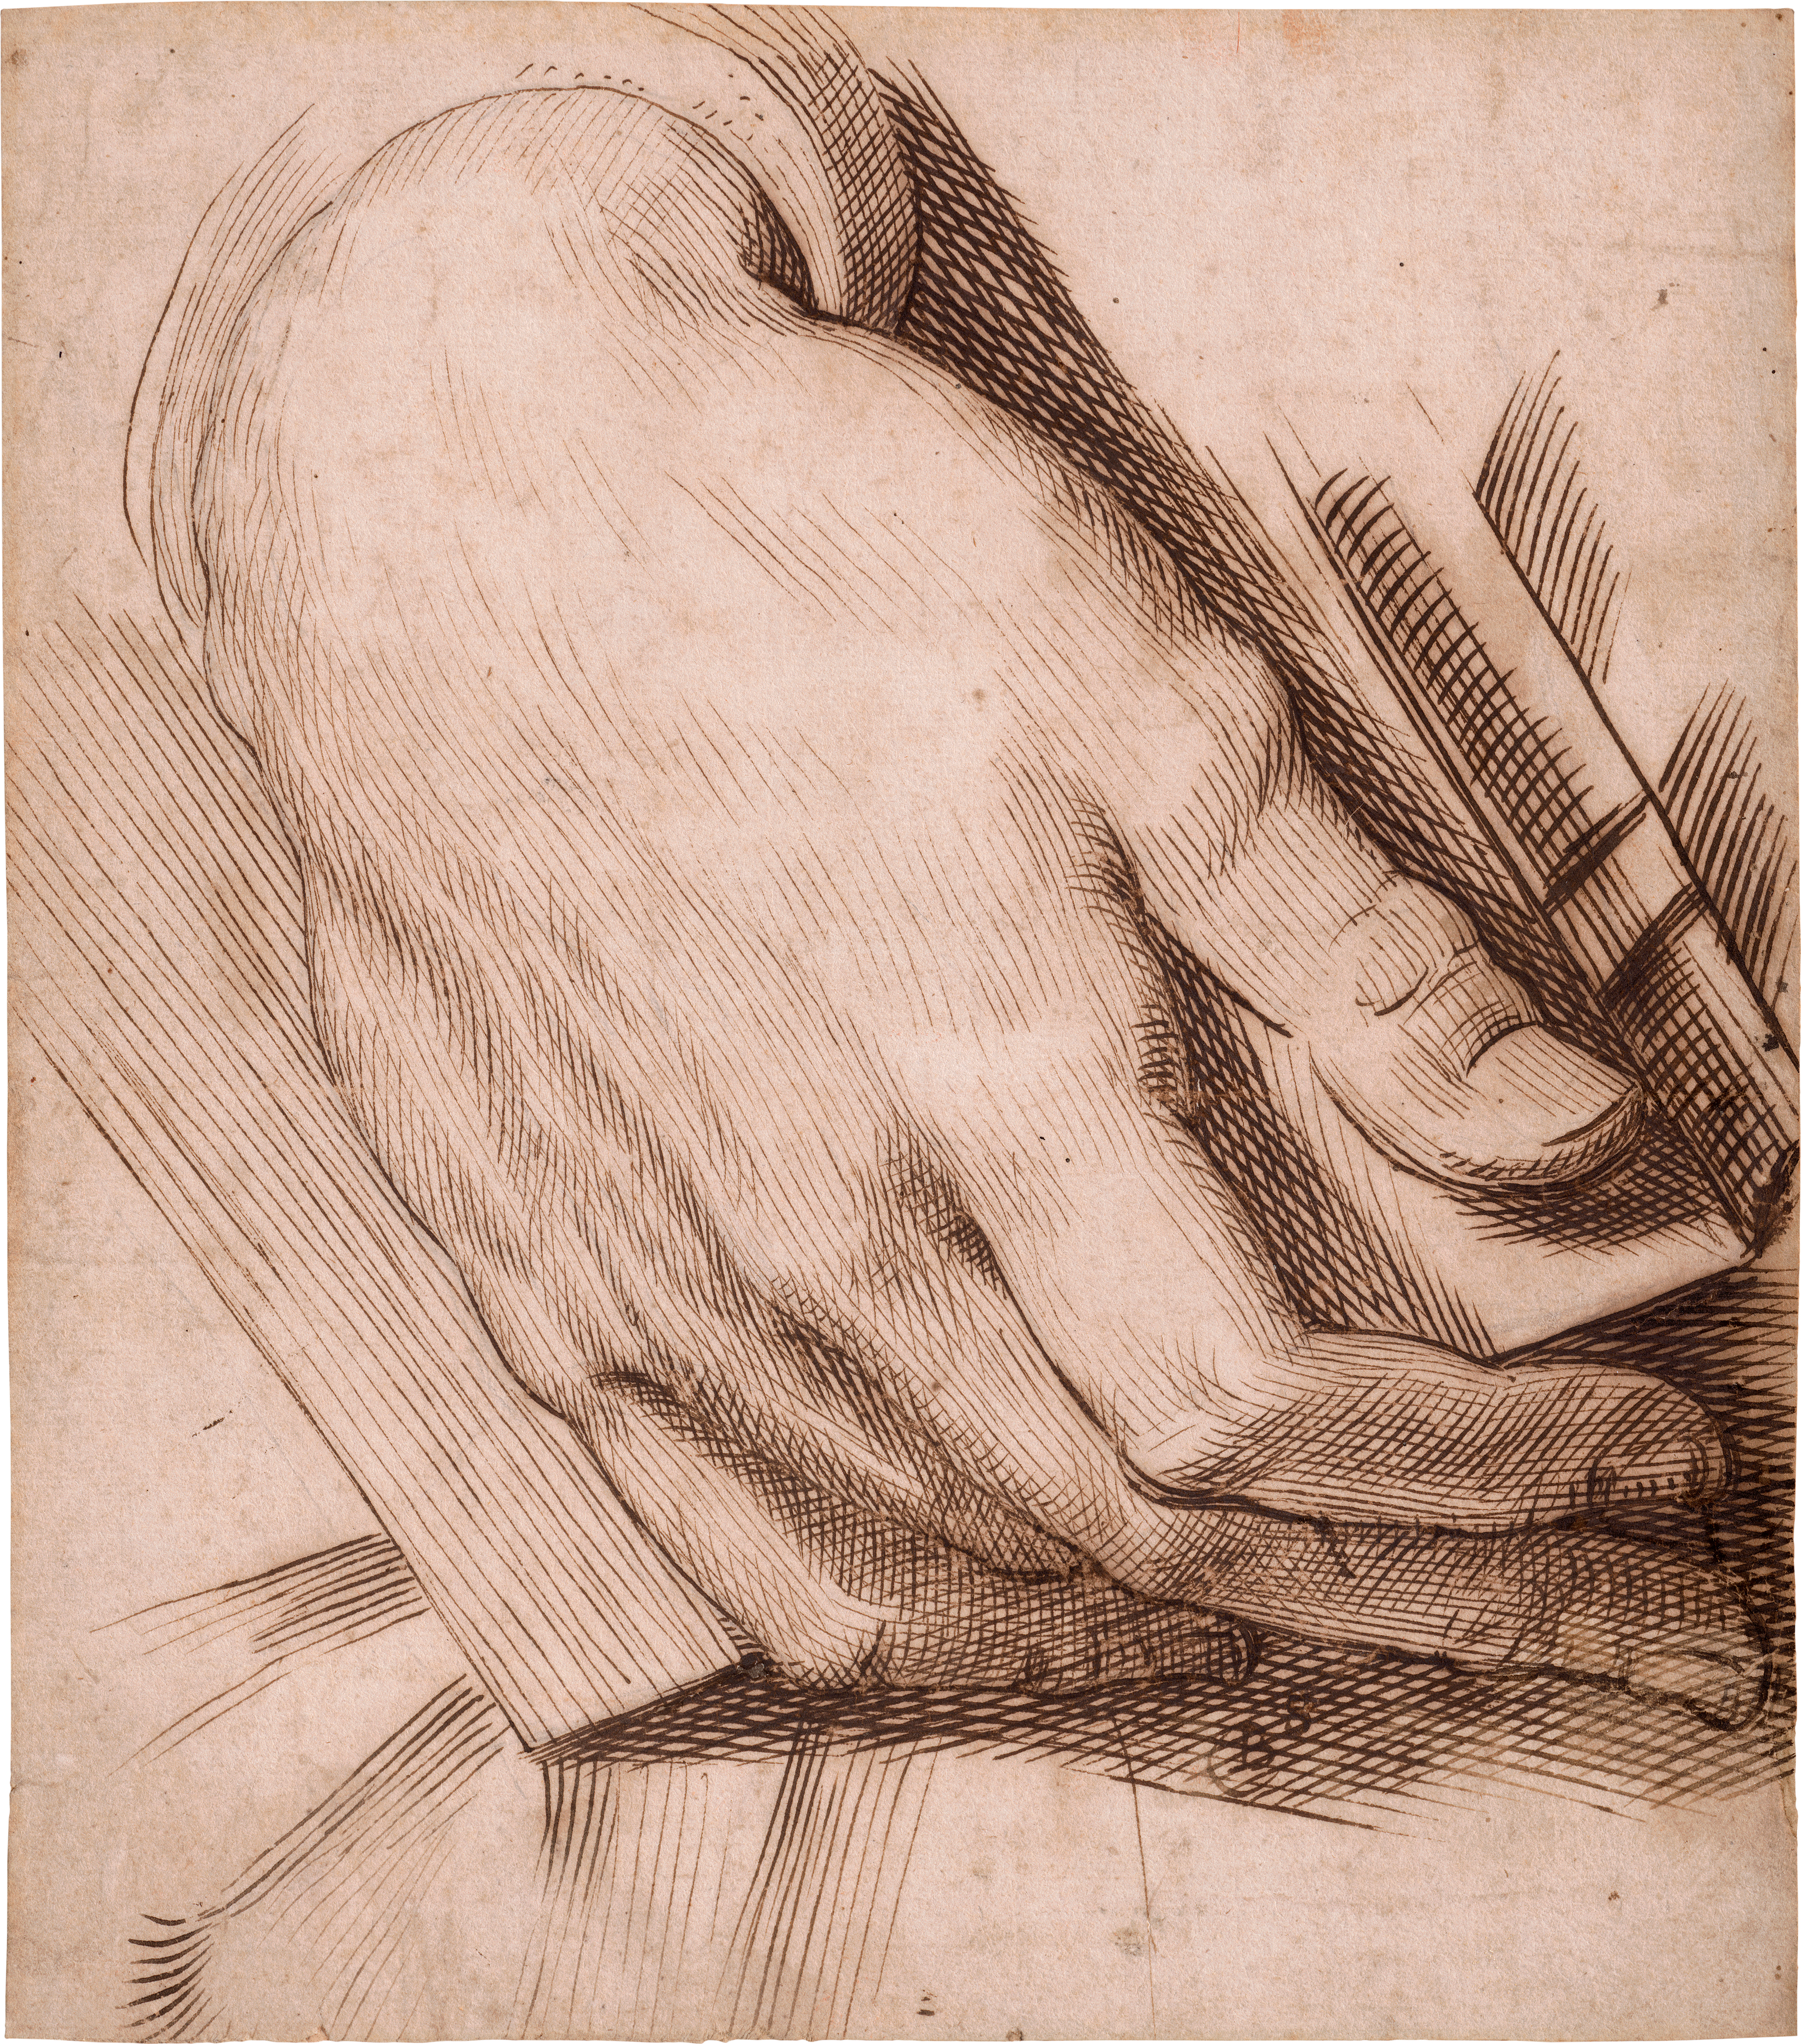 04_Passarotti_drawing Study of a Man’s Hand Holding a Book